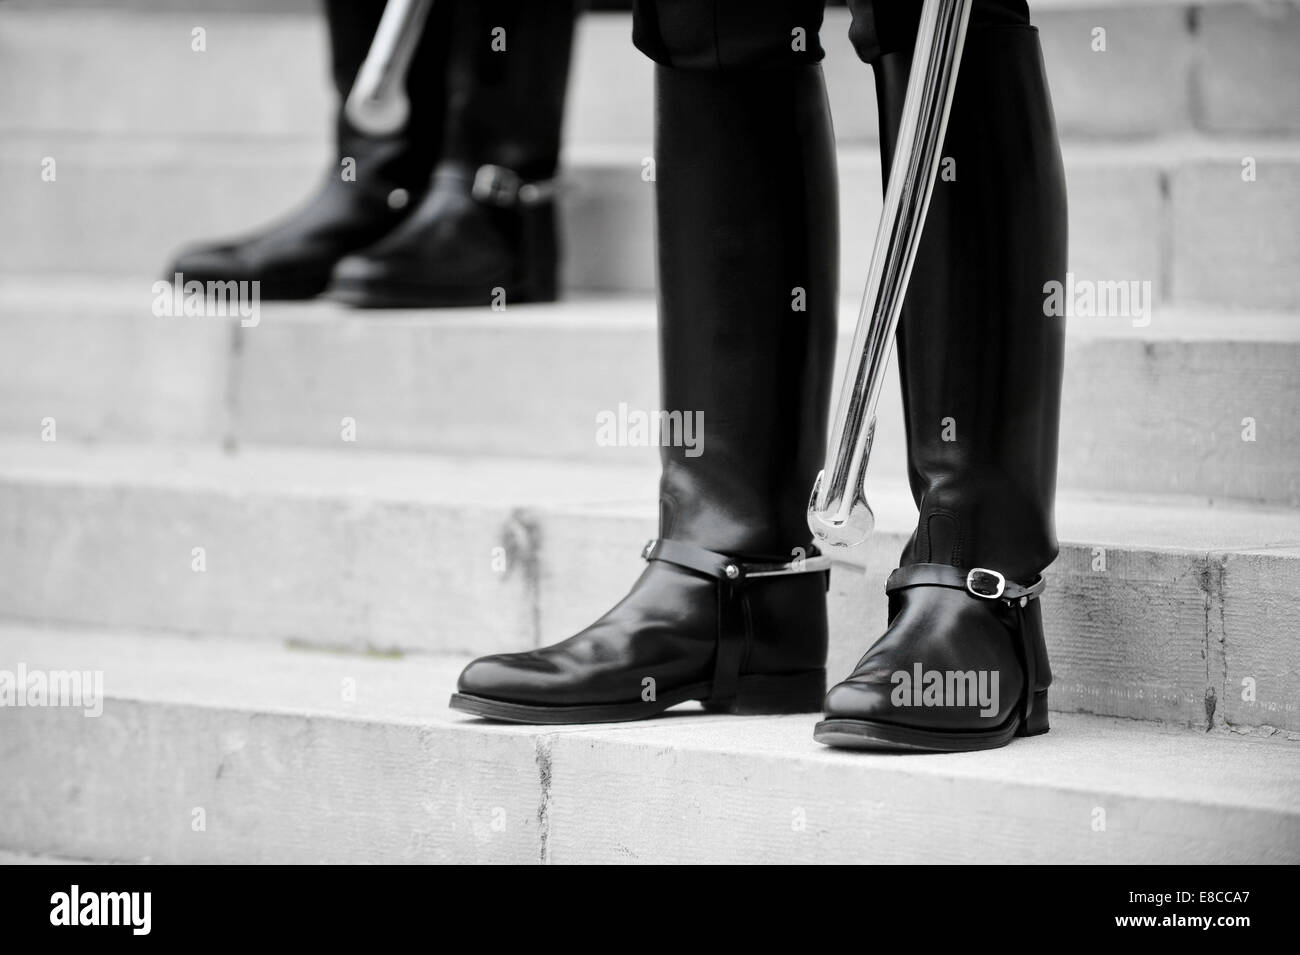 Boots detail of ceremonial guards of honour standing on the stairs Stock Photo